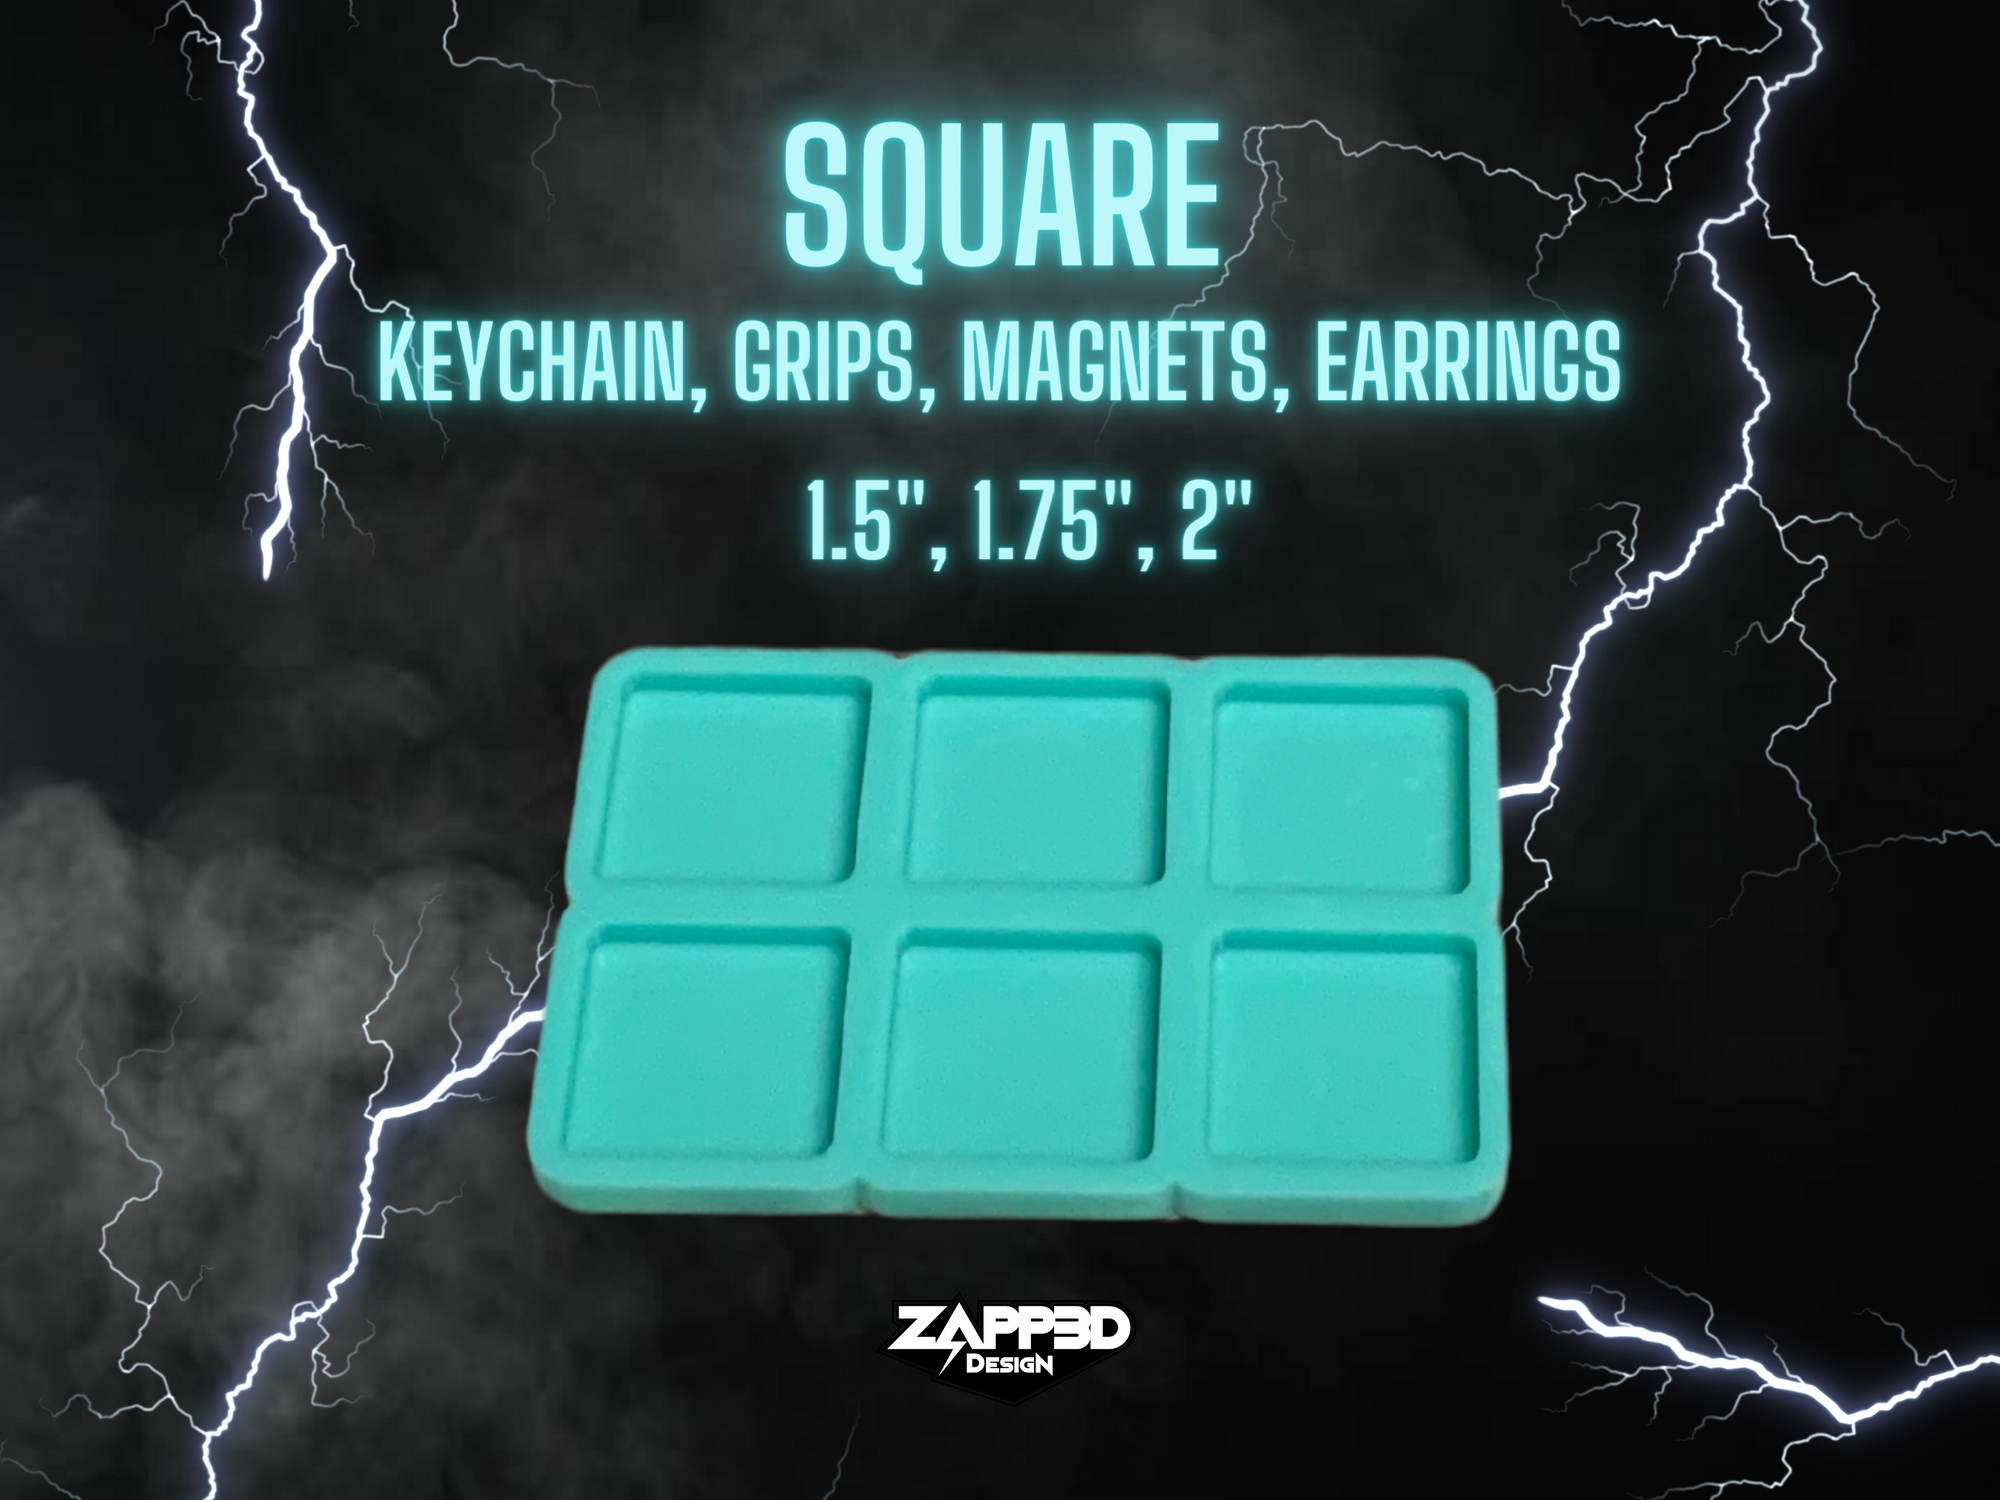 Square Keychain Mold | 3 Sizes | Magnet Mold, Phone Grip Mold, Hair Clip Mold | Set of 6 Silicone Mold for Resin